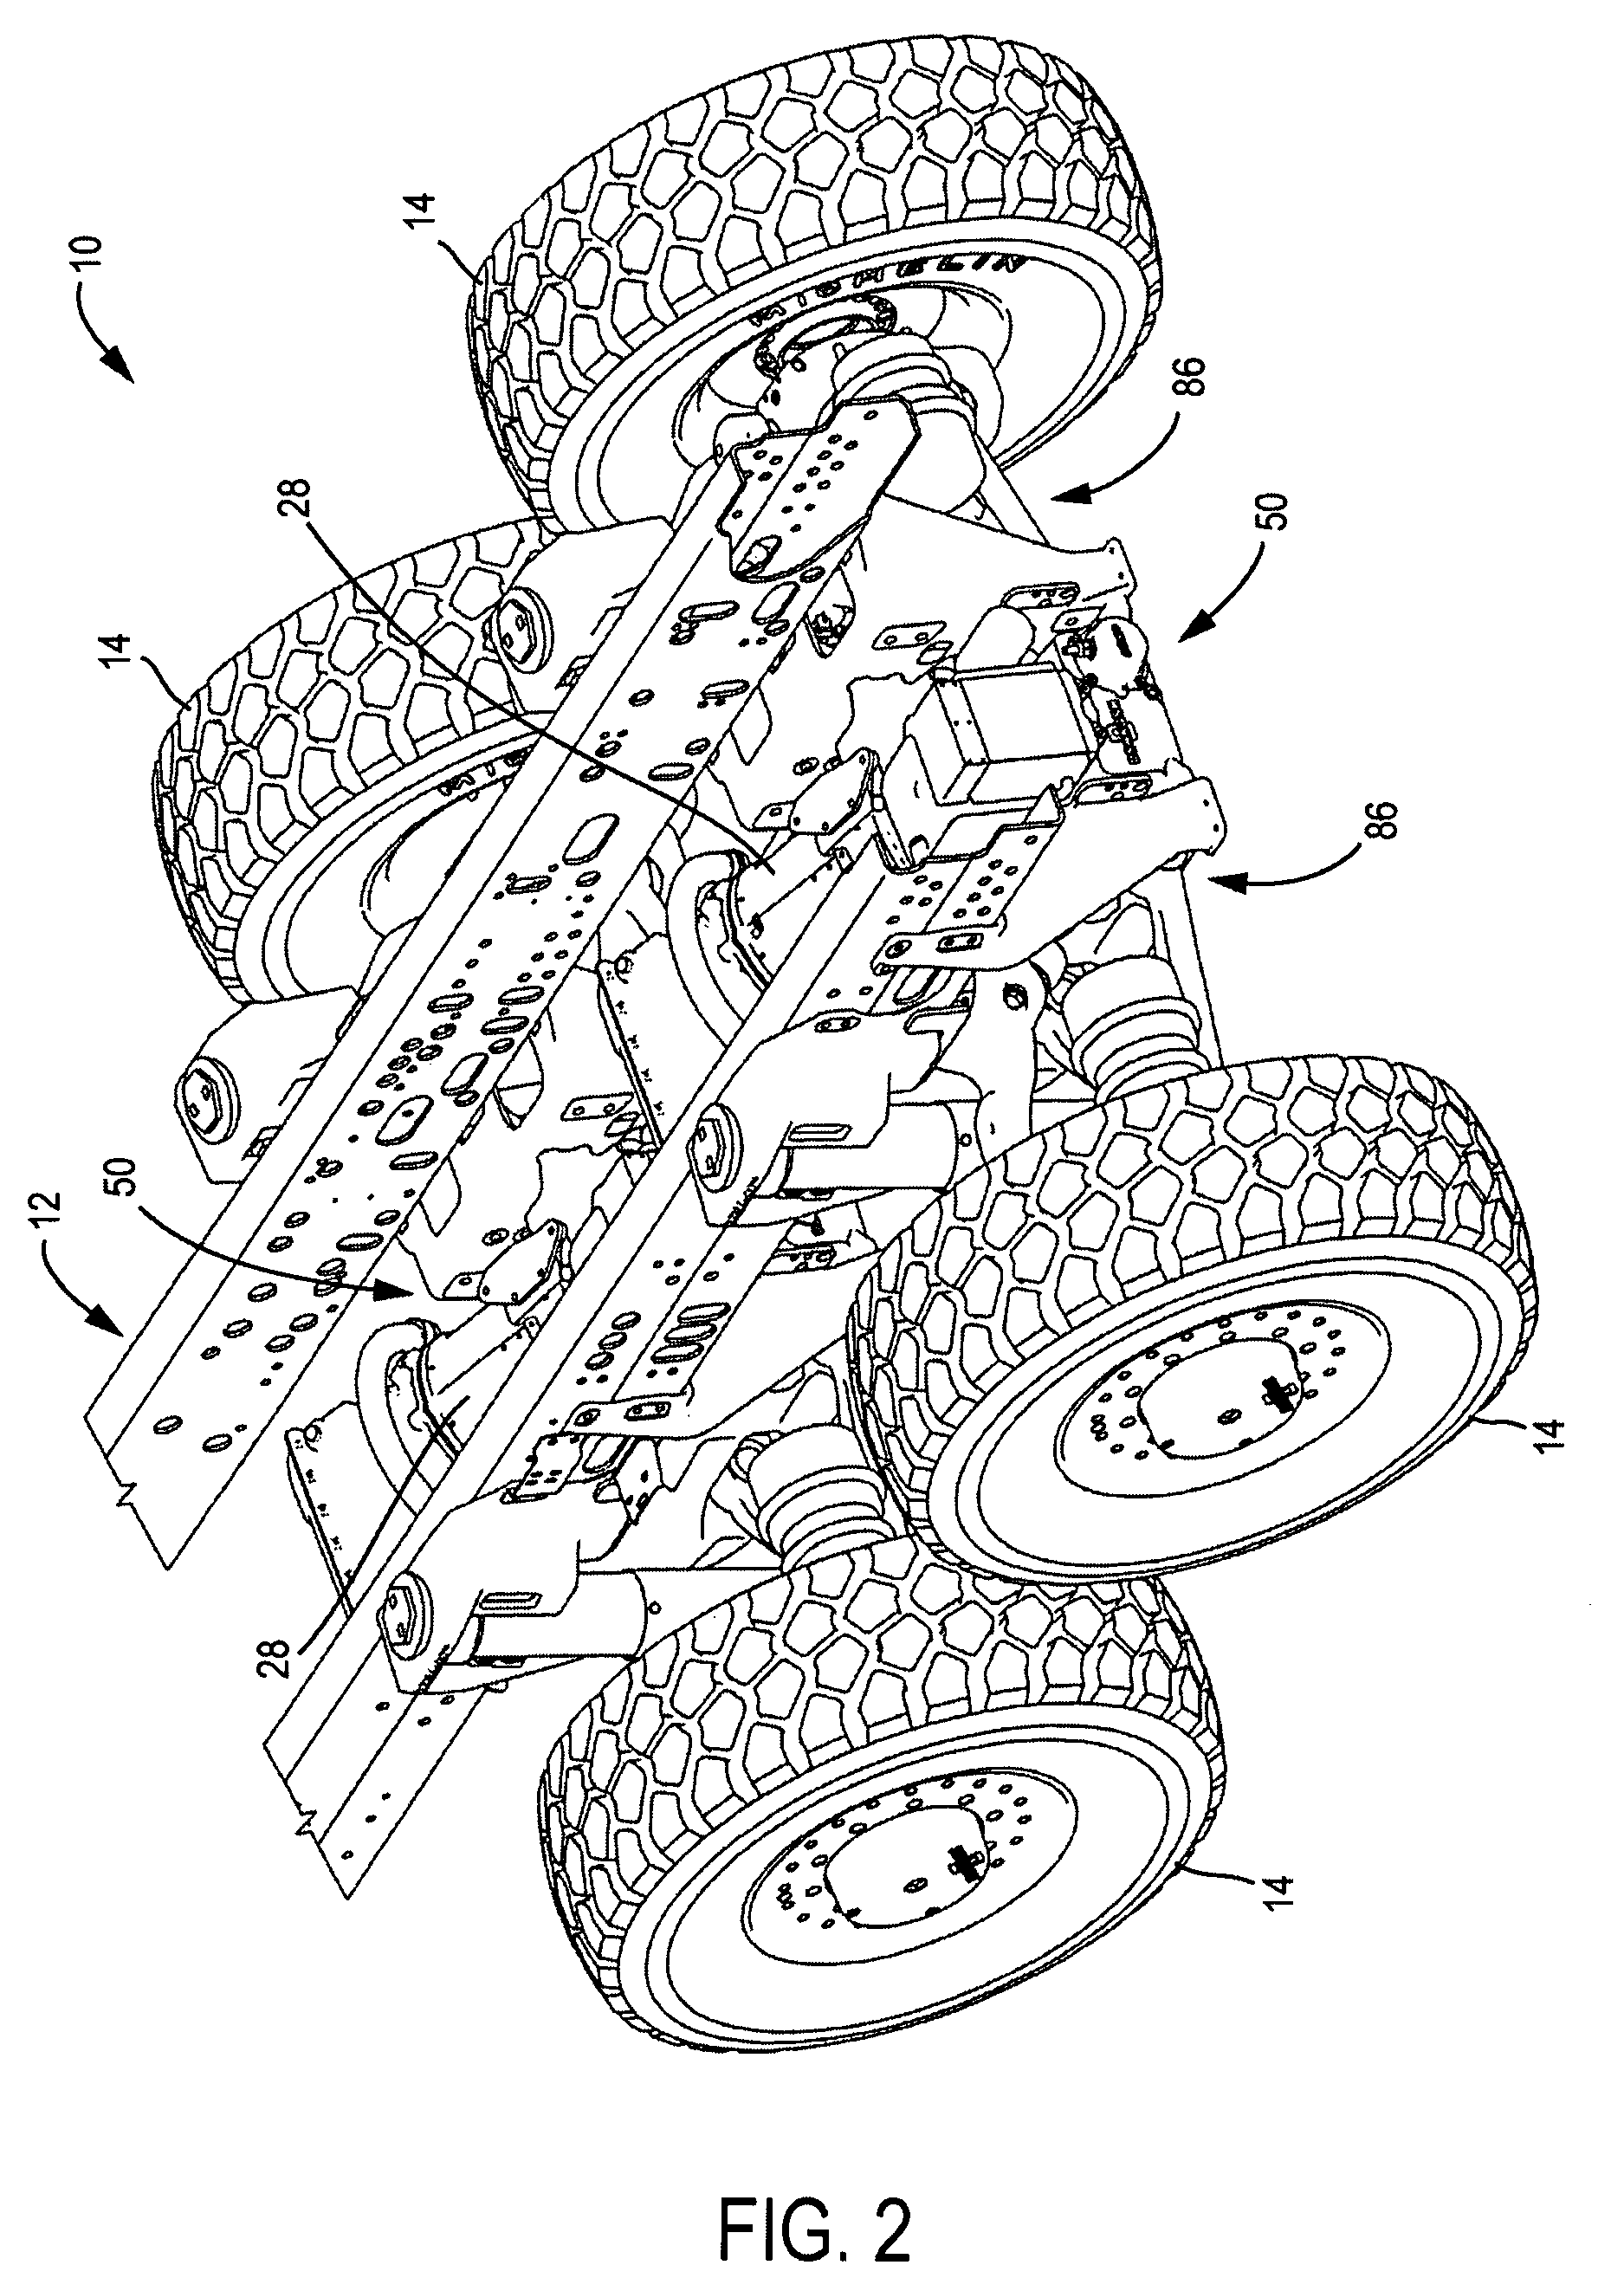 Power takeoff for an electric vehicle